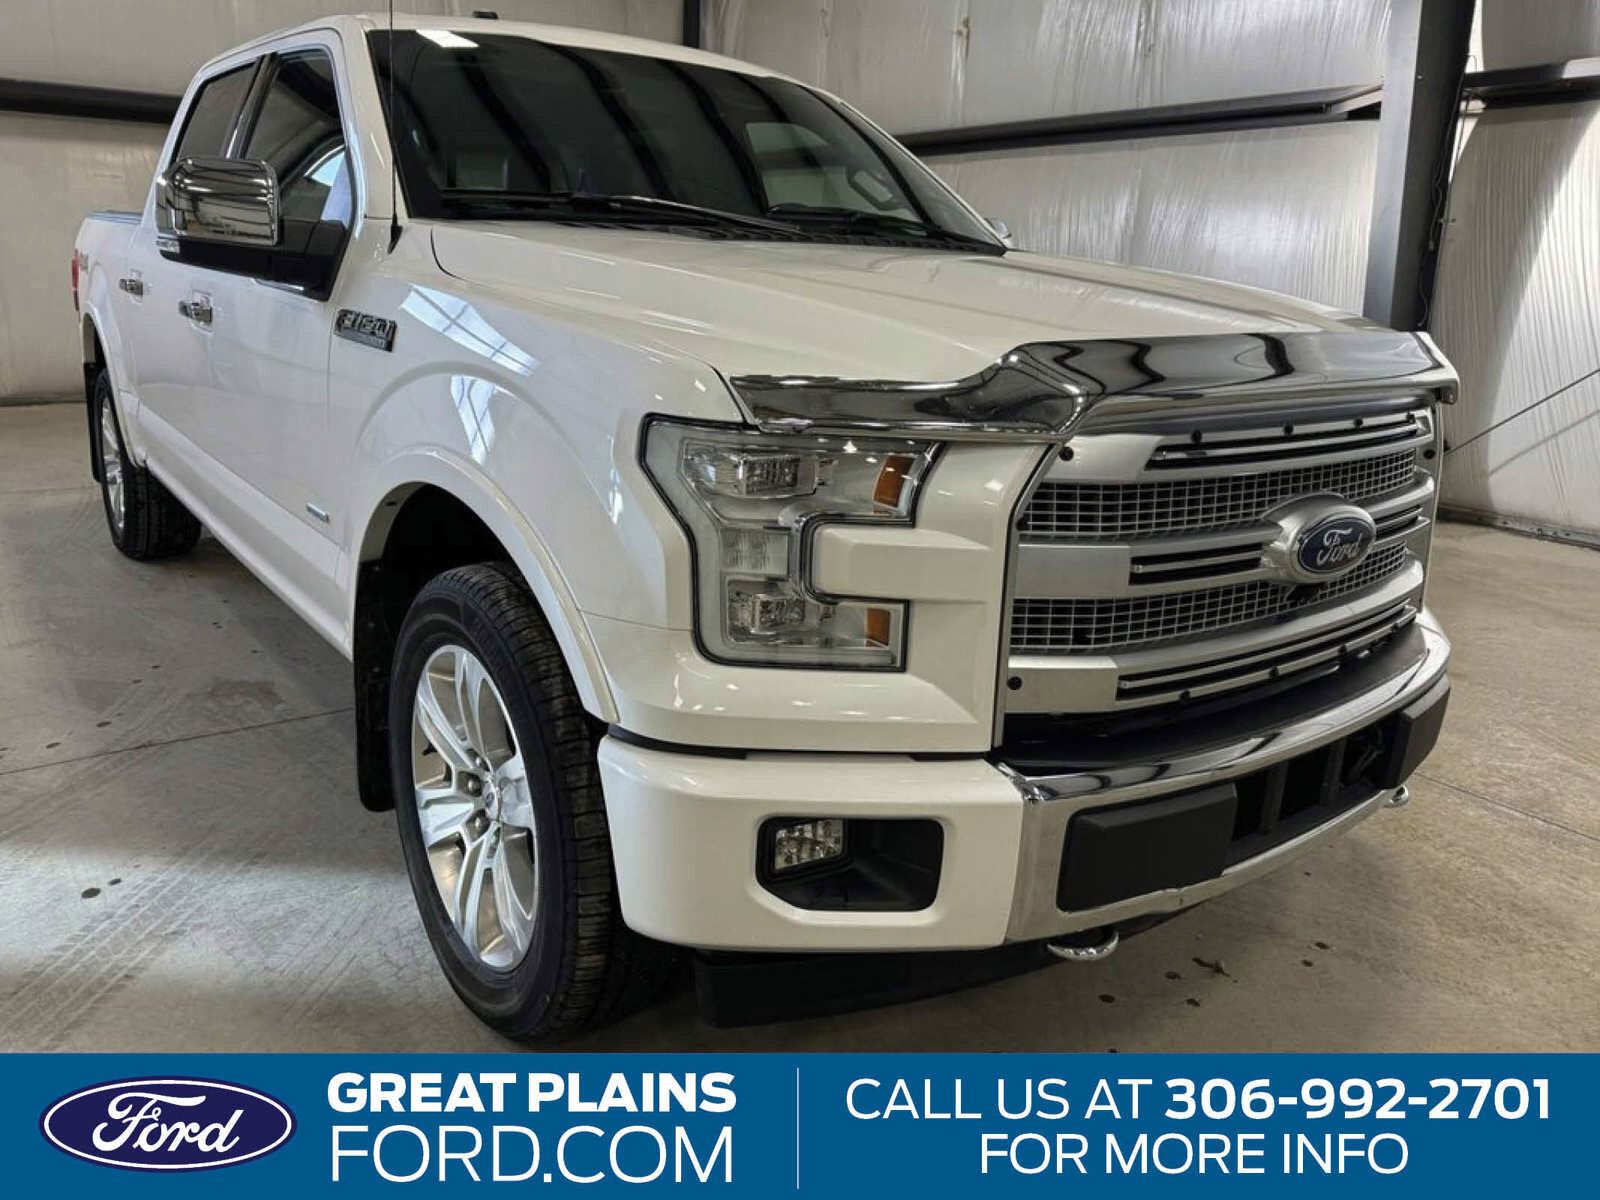 2017 Ford F-150 Platinum | 4x4 |  Heated & Cooled Leather Seats | 